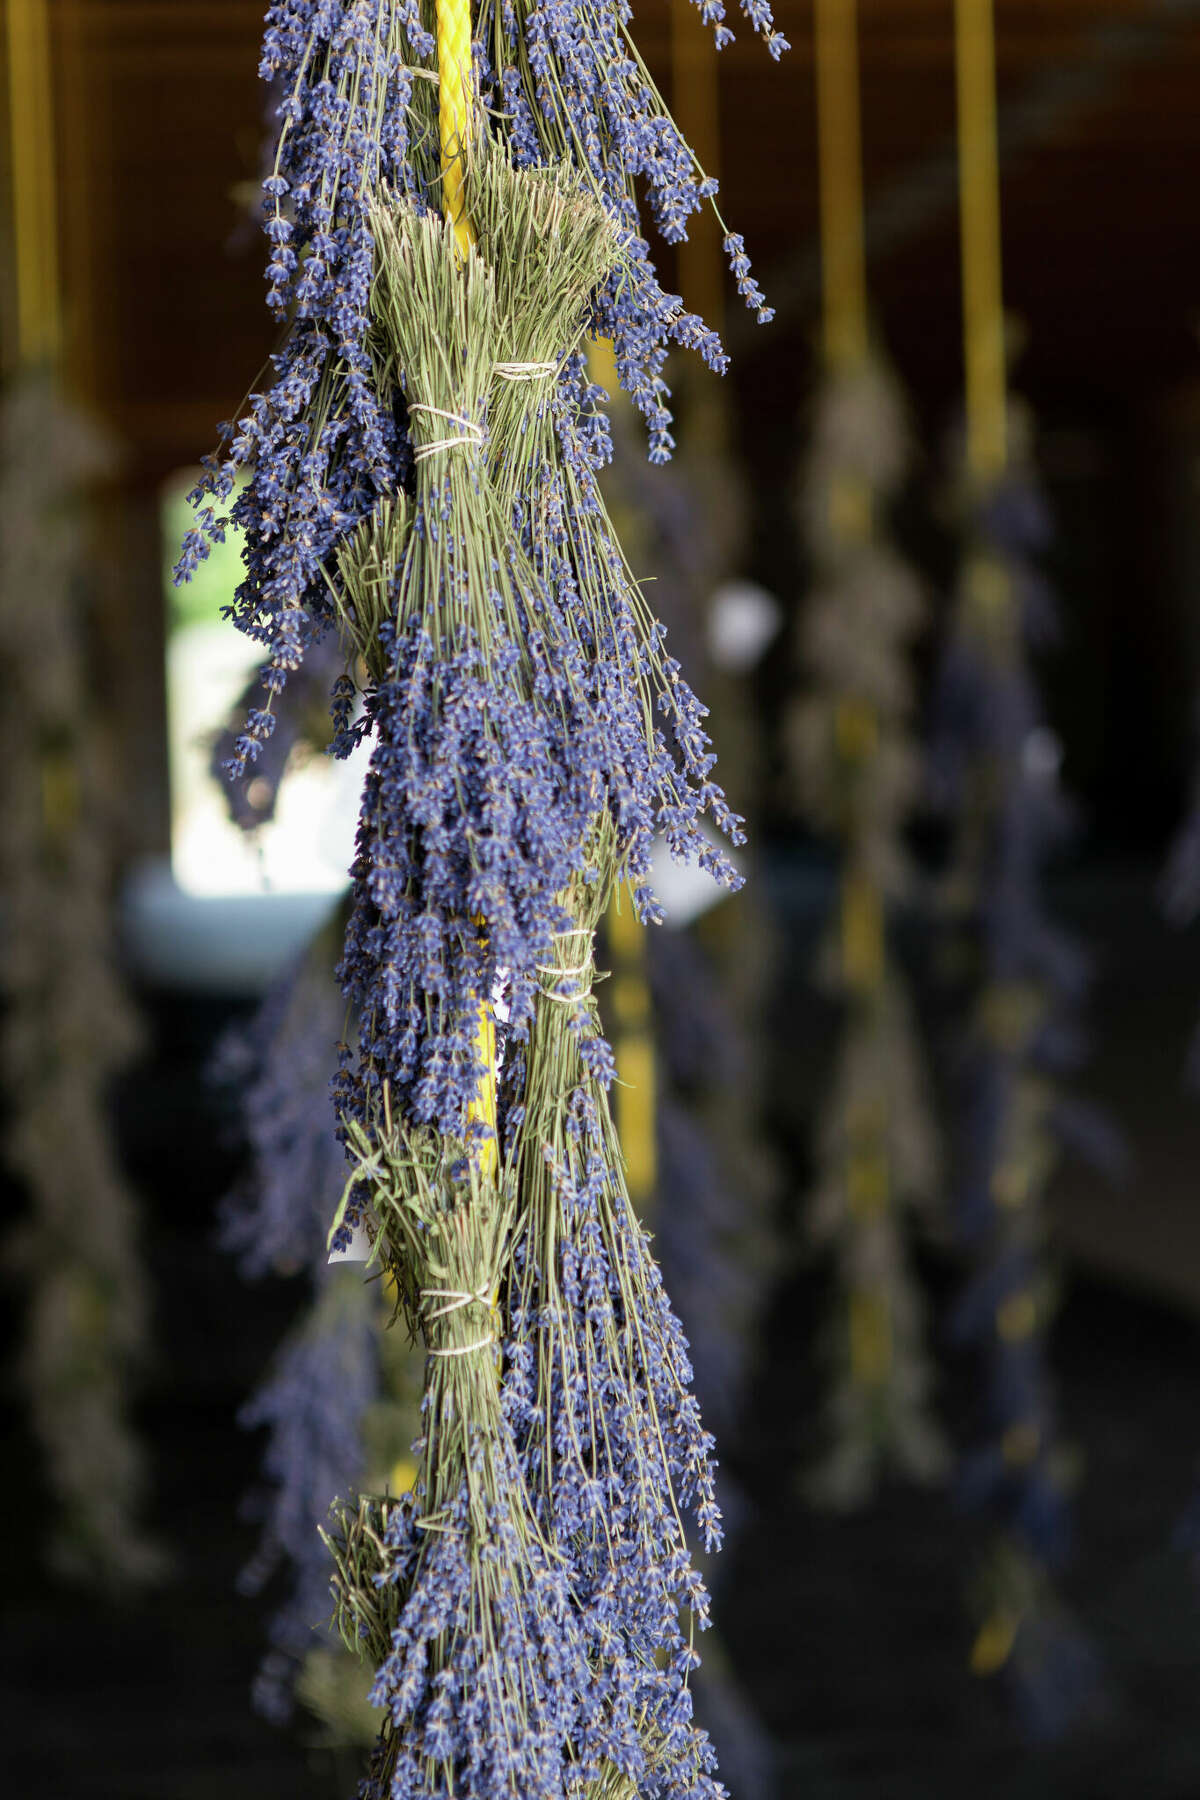 Lavender Hill Farm, located north of Boyne City, Michigan is the state's largest commercial lavender farm.